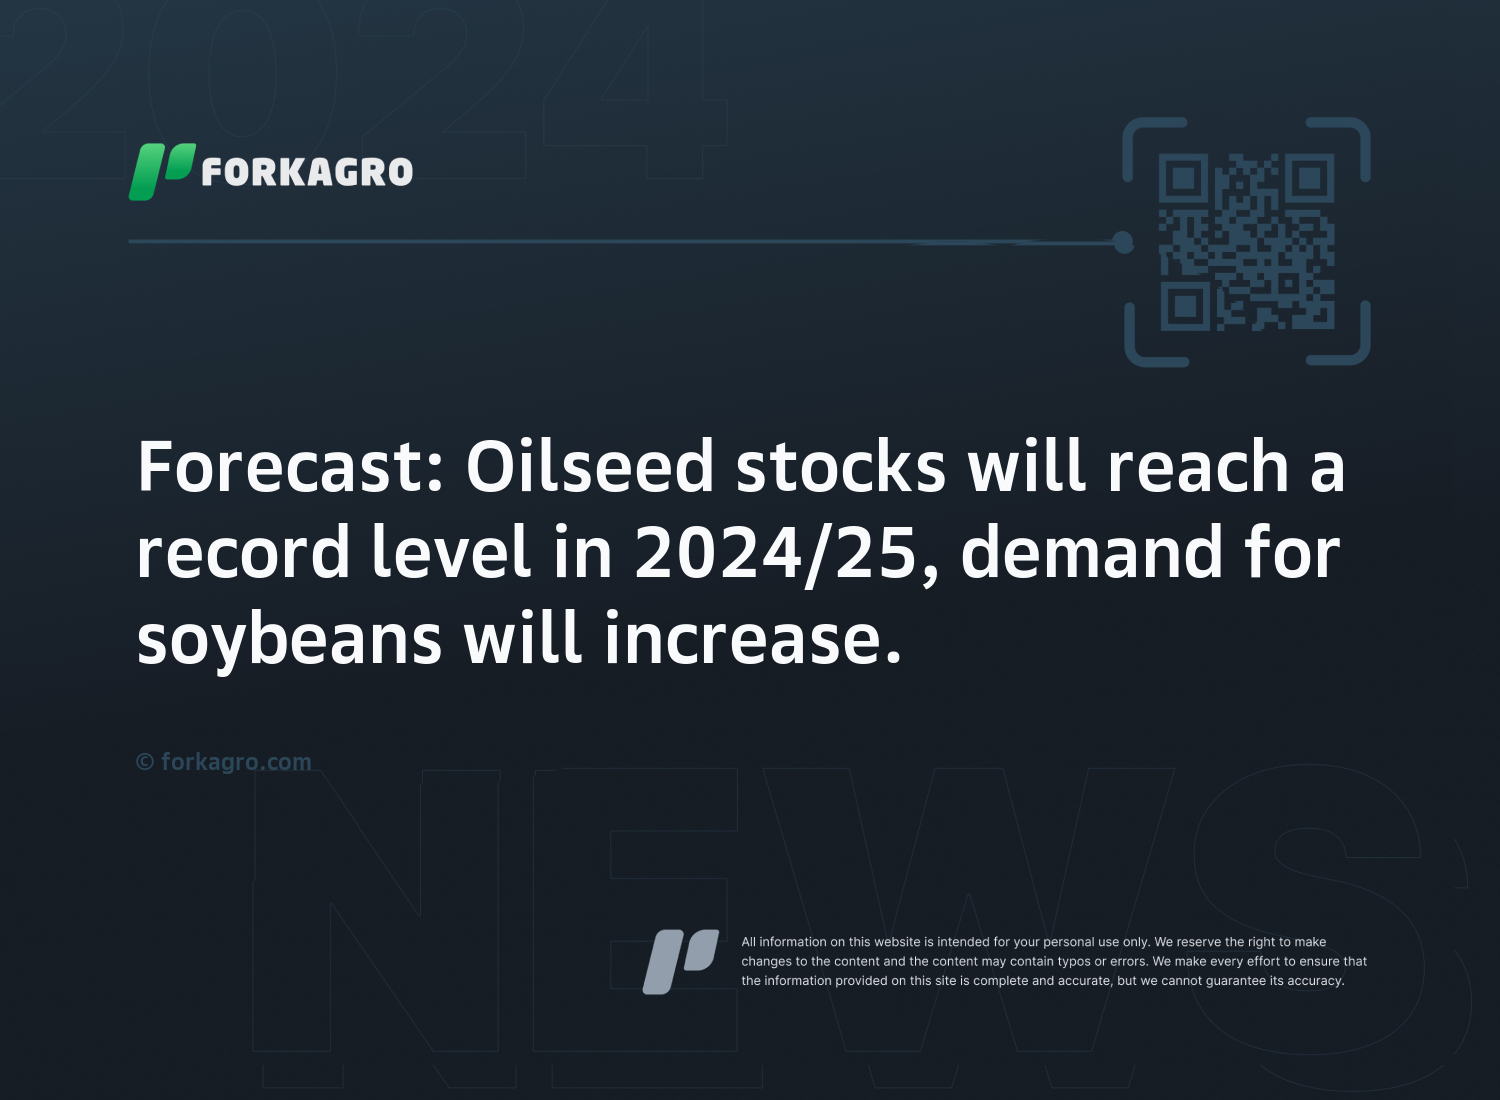 Forecast: Oilseed stocks will reach a record level in 2024/25, demand for soybeans will increase.